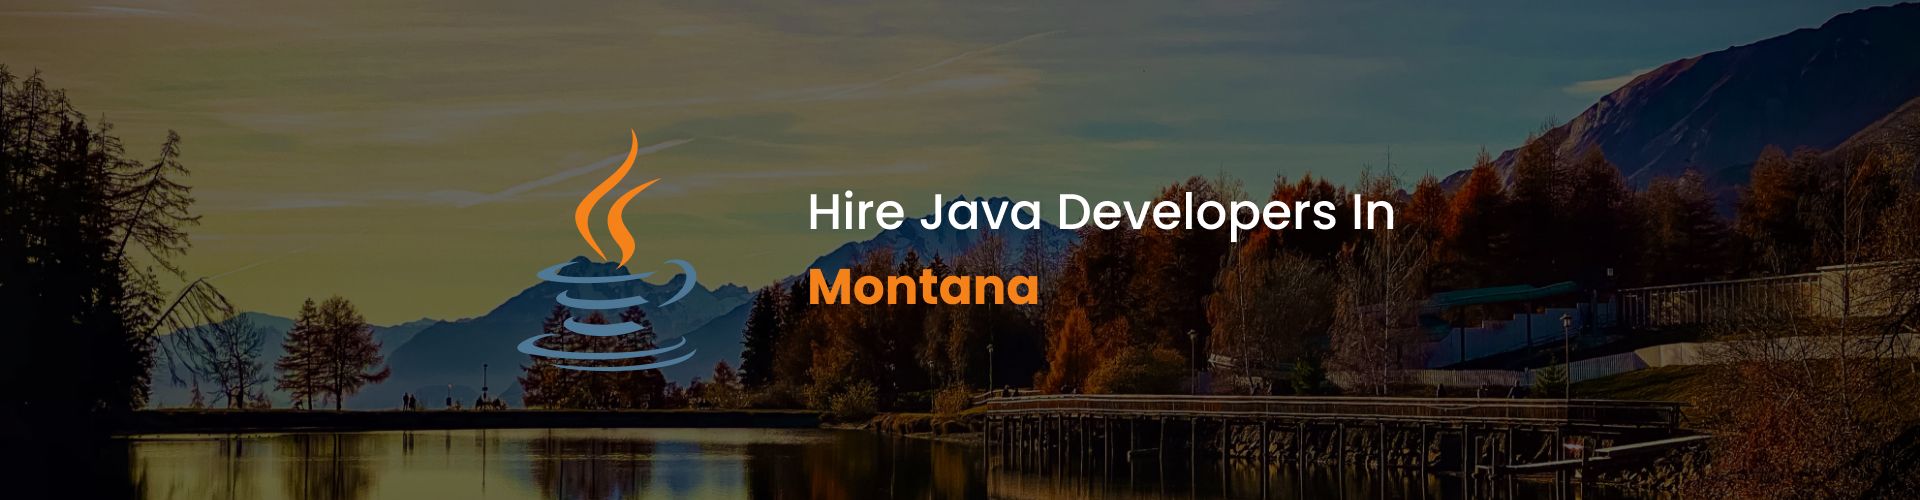 hire java developers in montana